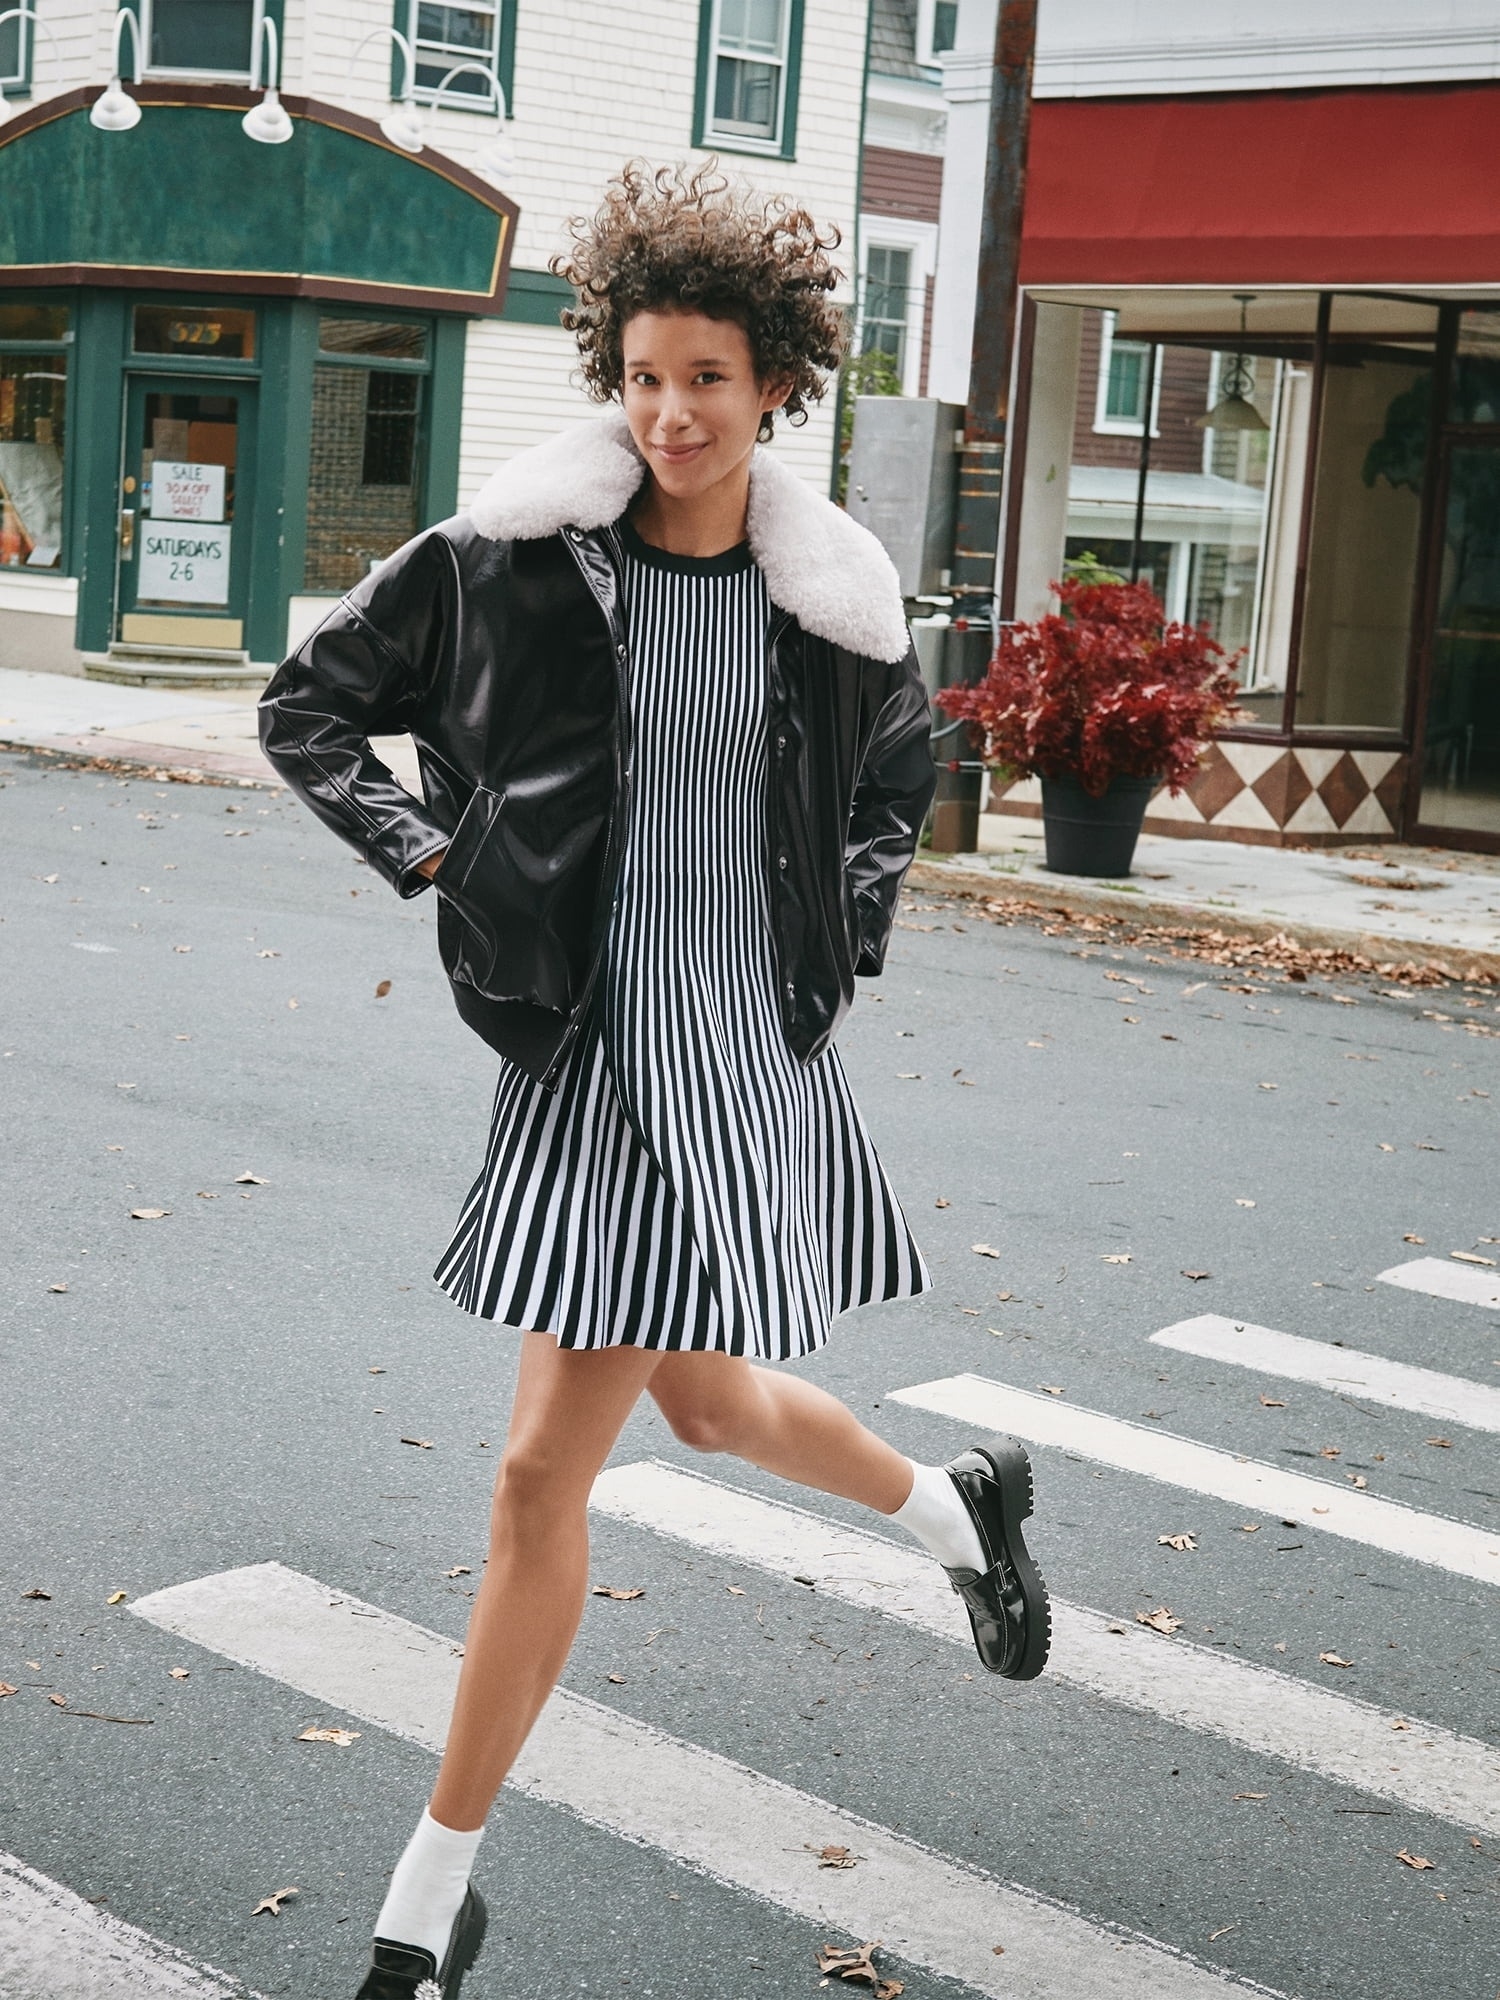 model in a striped dress and black jacket with fur collar, posing on a crosswalk